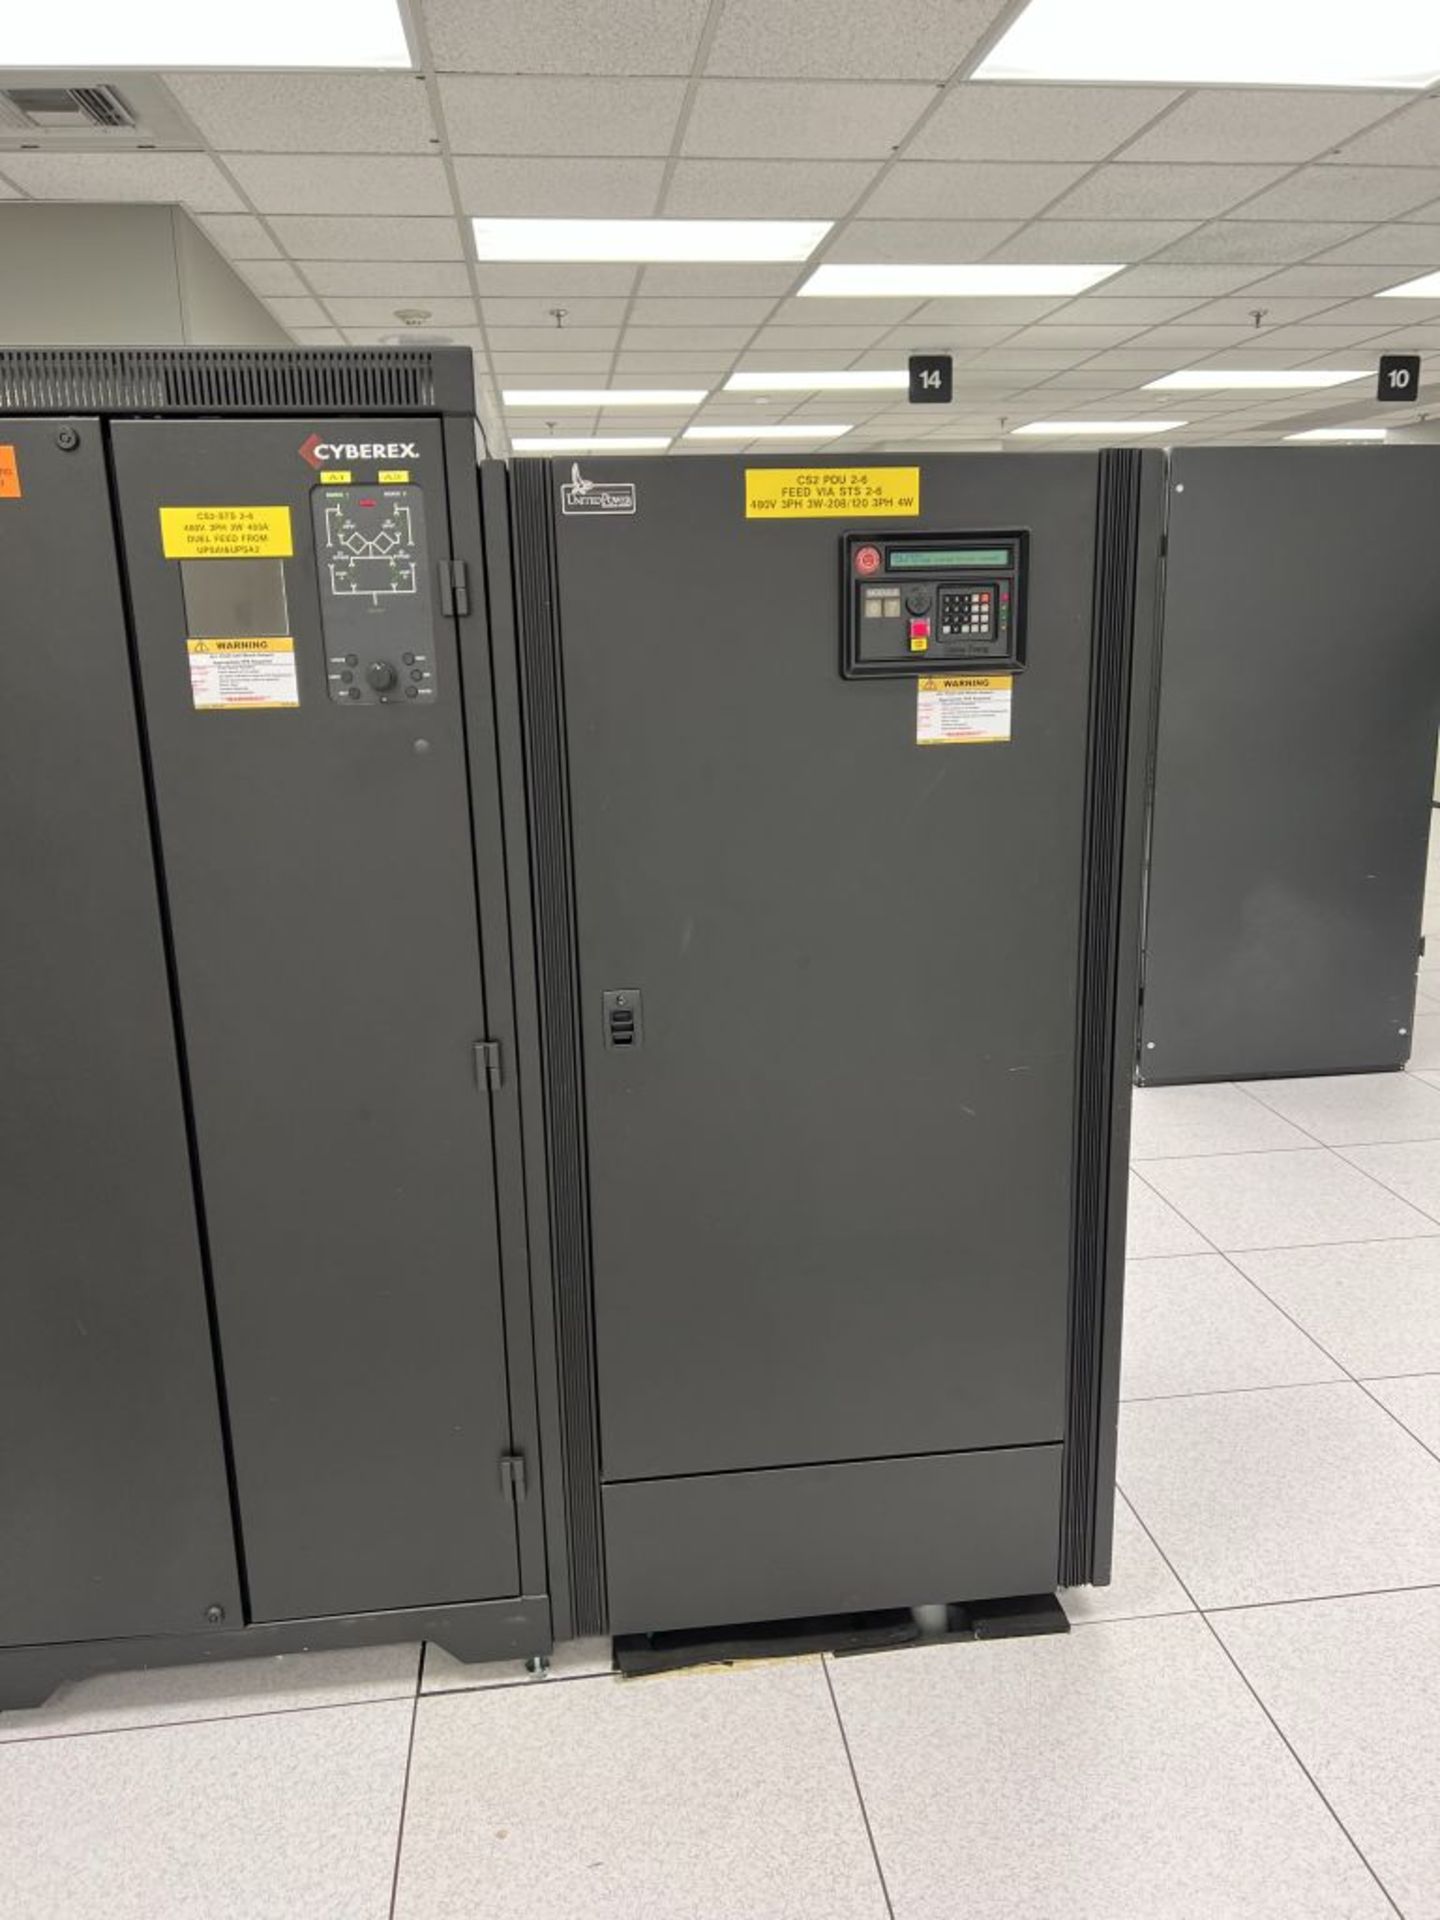 Spartanburg, SC - Cyberex Digital Static Transfer Switch with United Power Power Distribution Module - Image 2 of 3